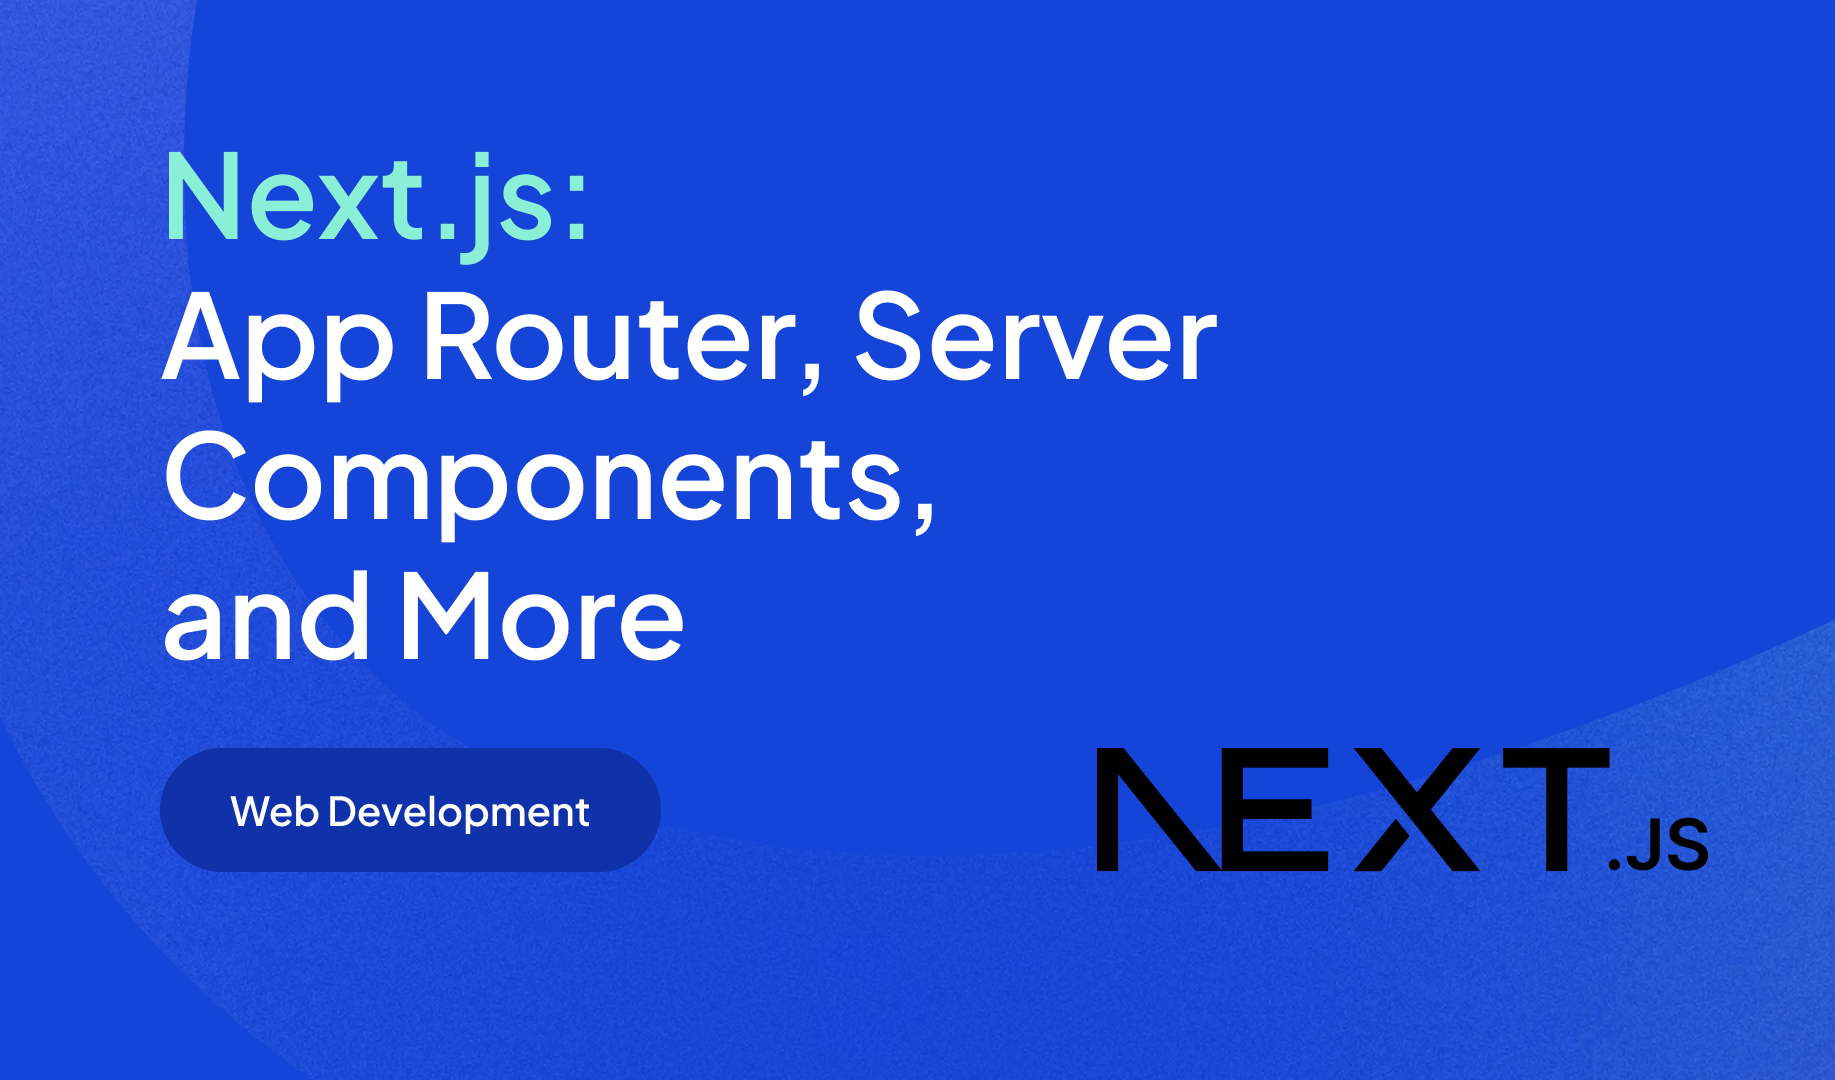 Next.js: App Router, Server Components, and More